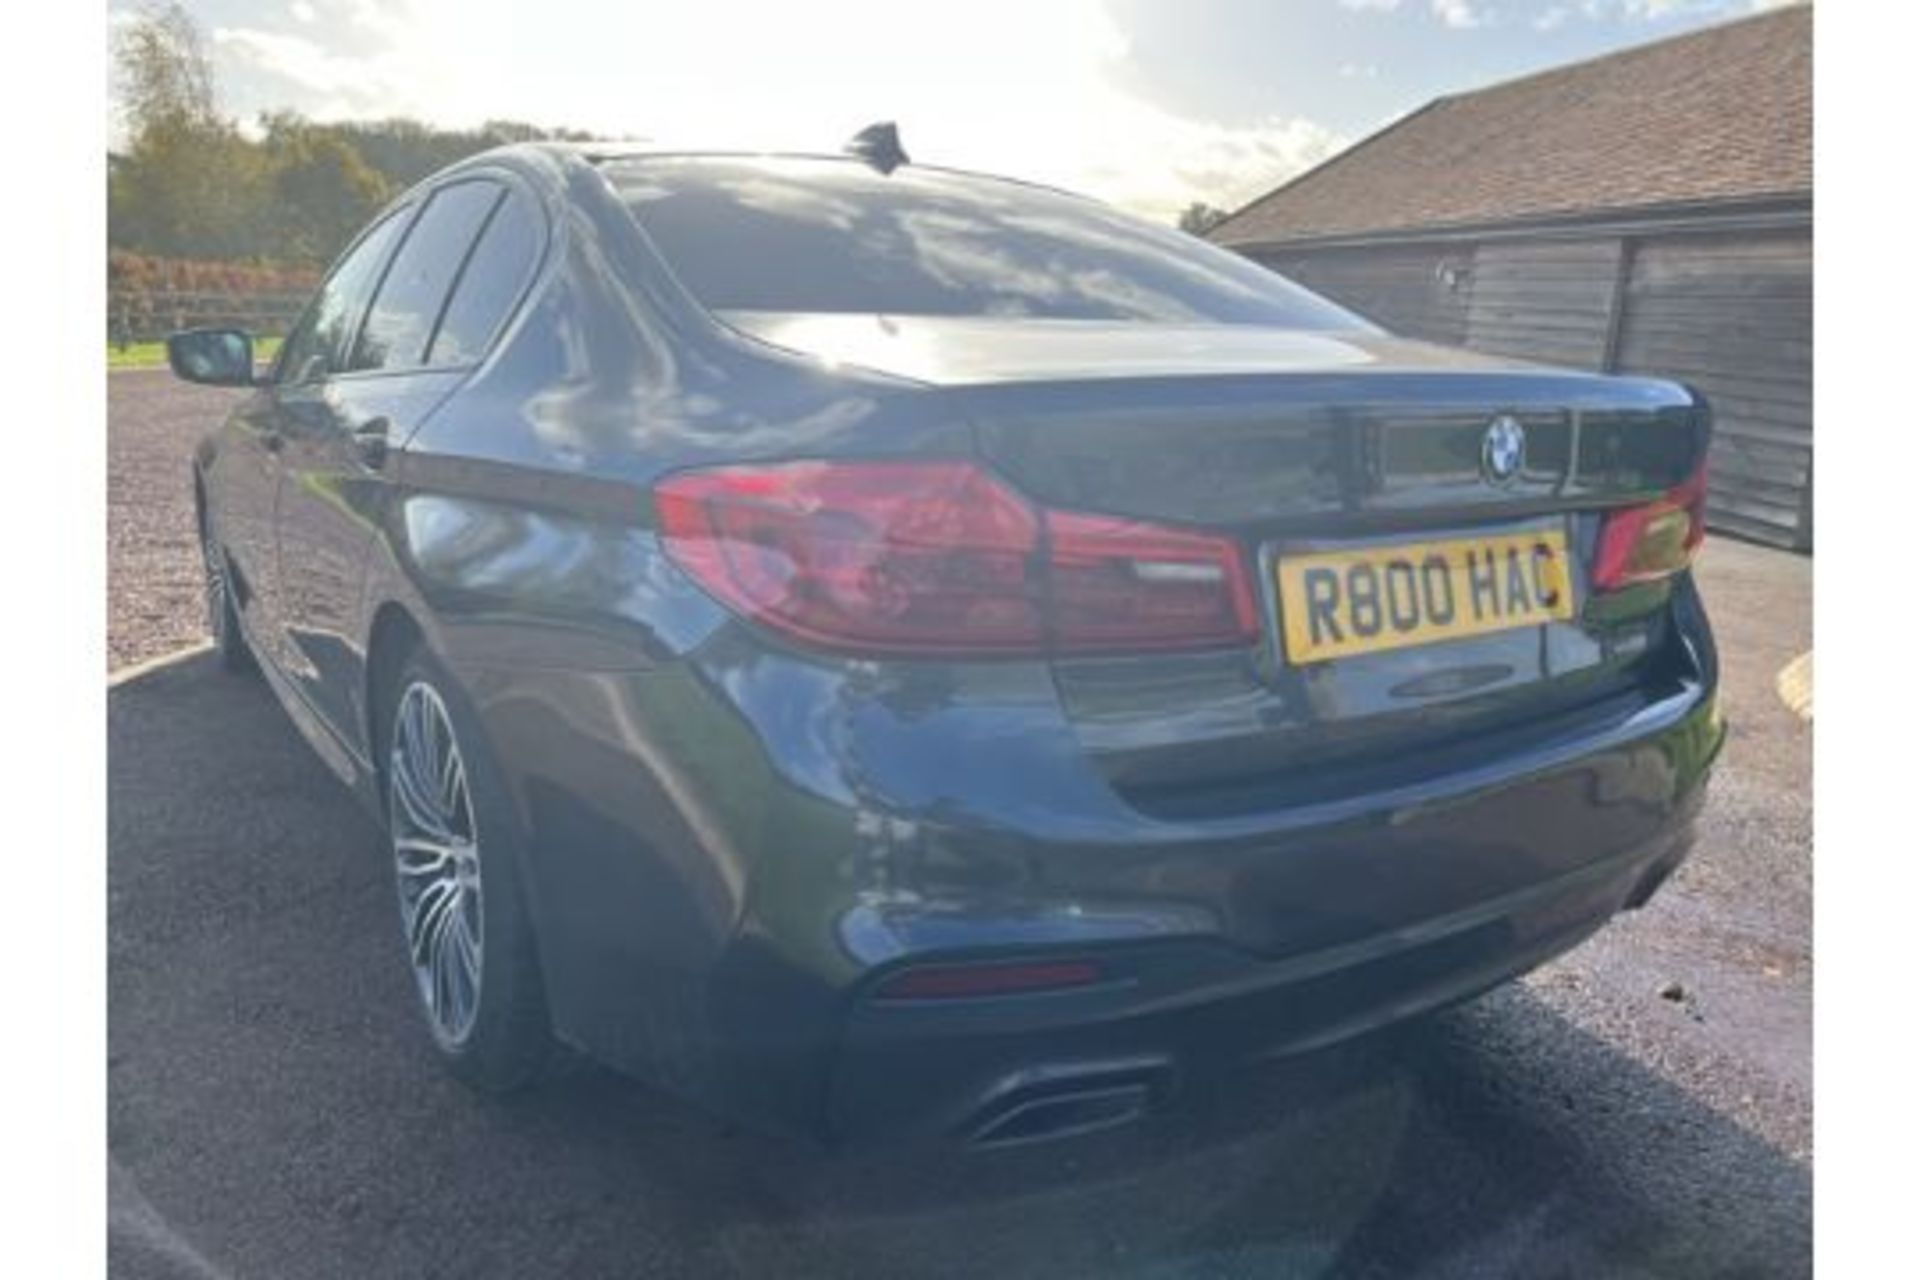 (RESERVE MET)BMW 5 Series 520D "M SPORT" Automatic 2019 19 Reg - Air Con - Full Leather - 63k Miles - Image 7 of 12